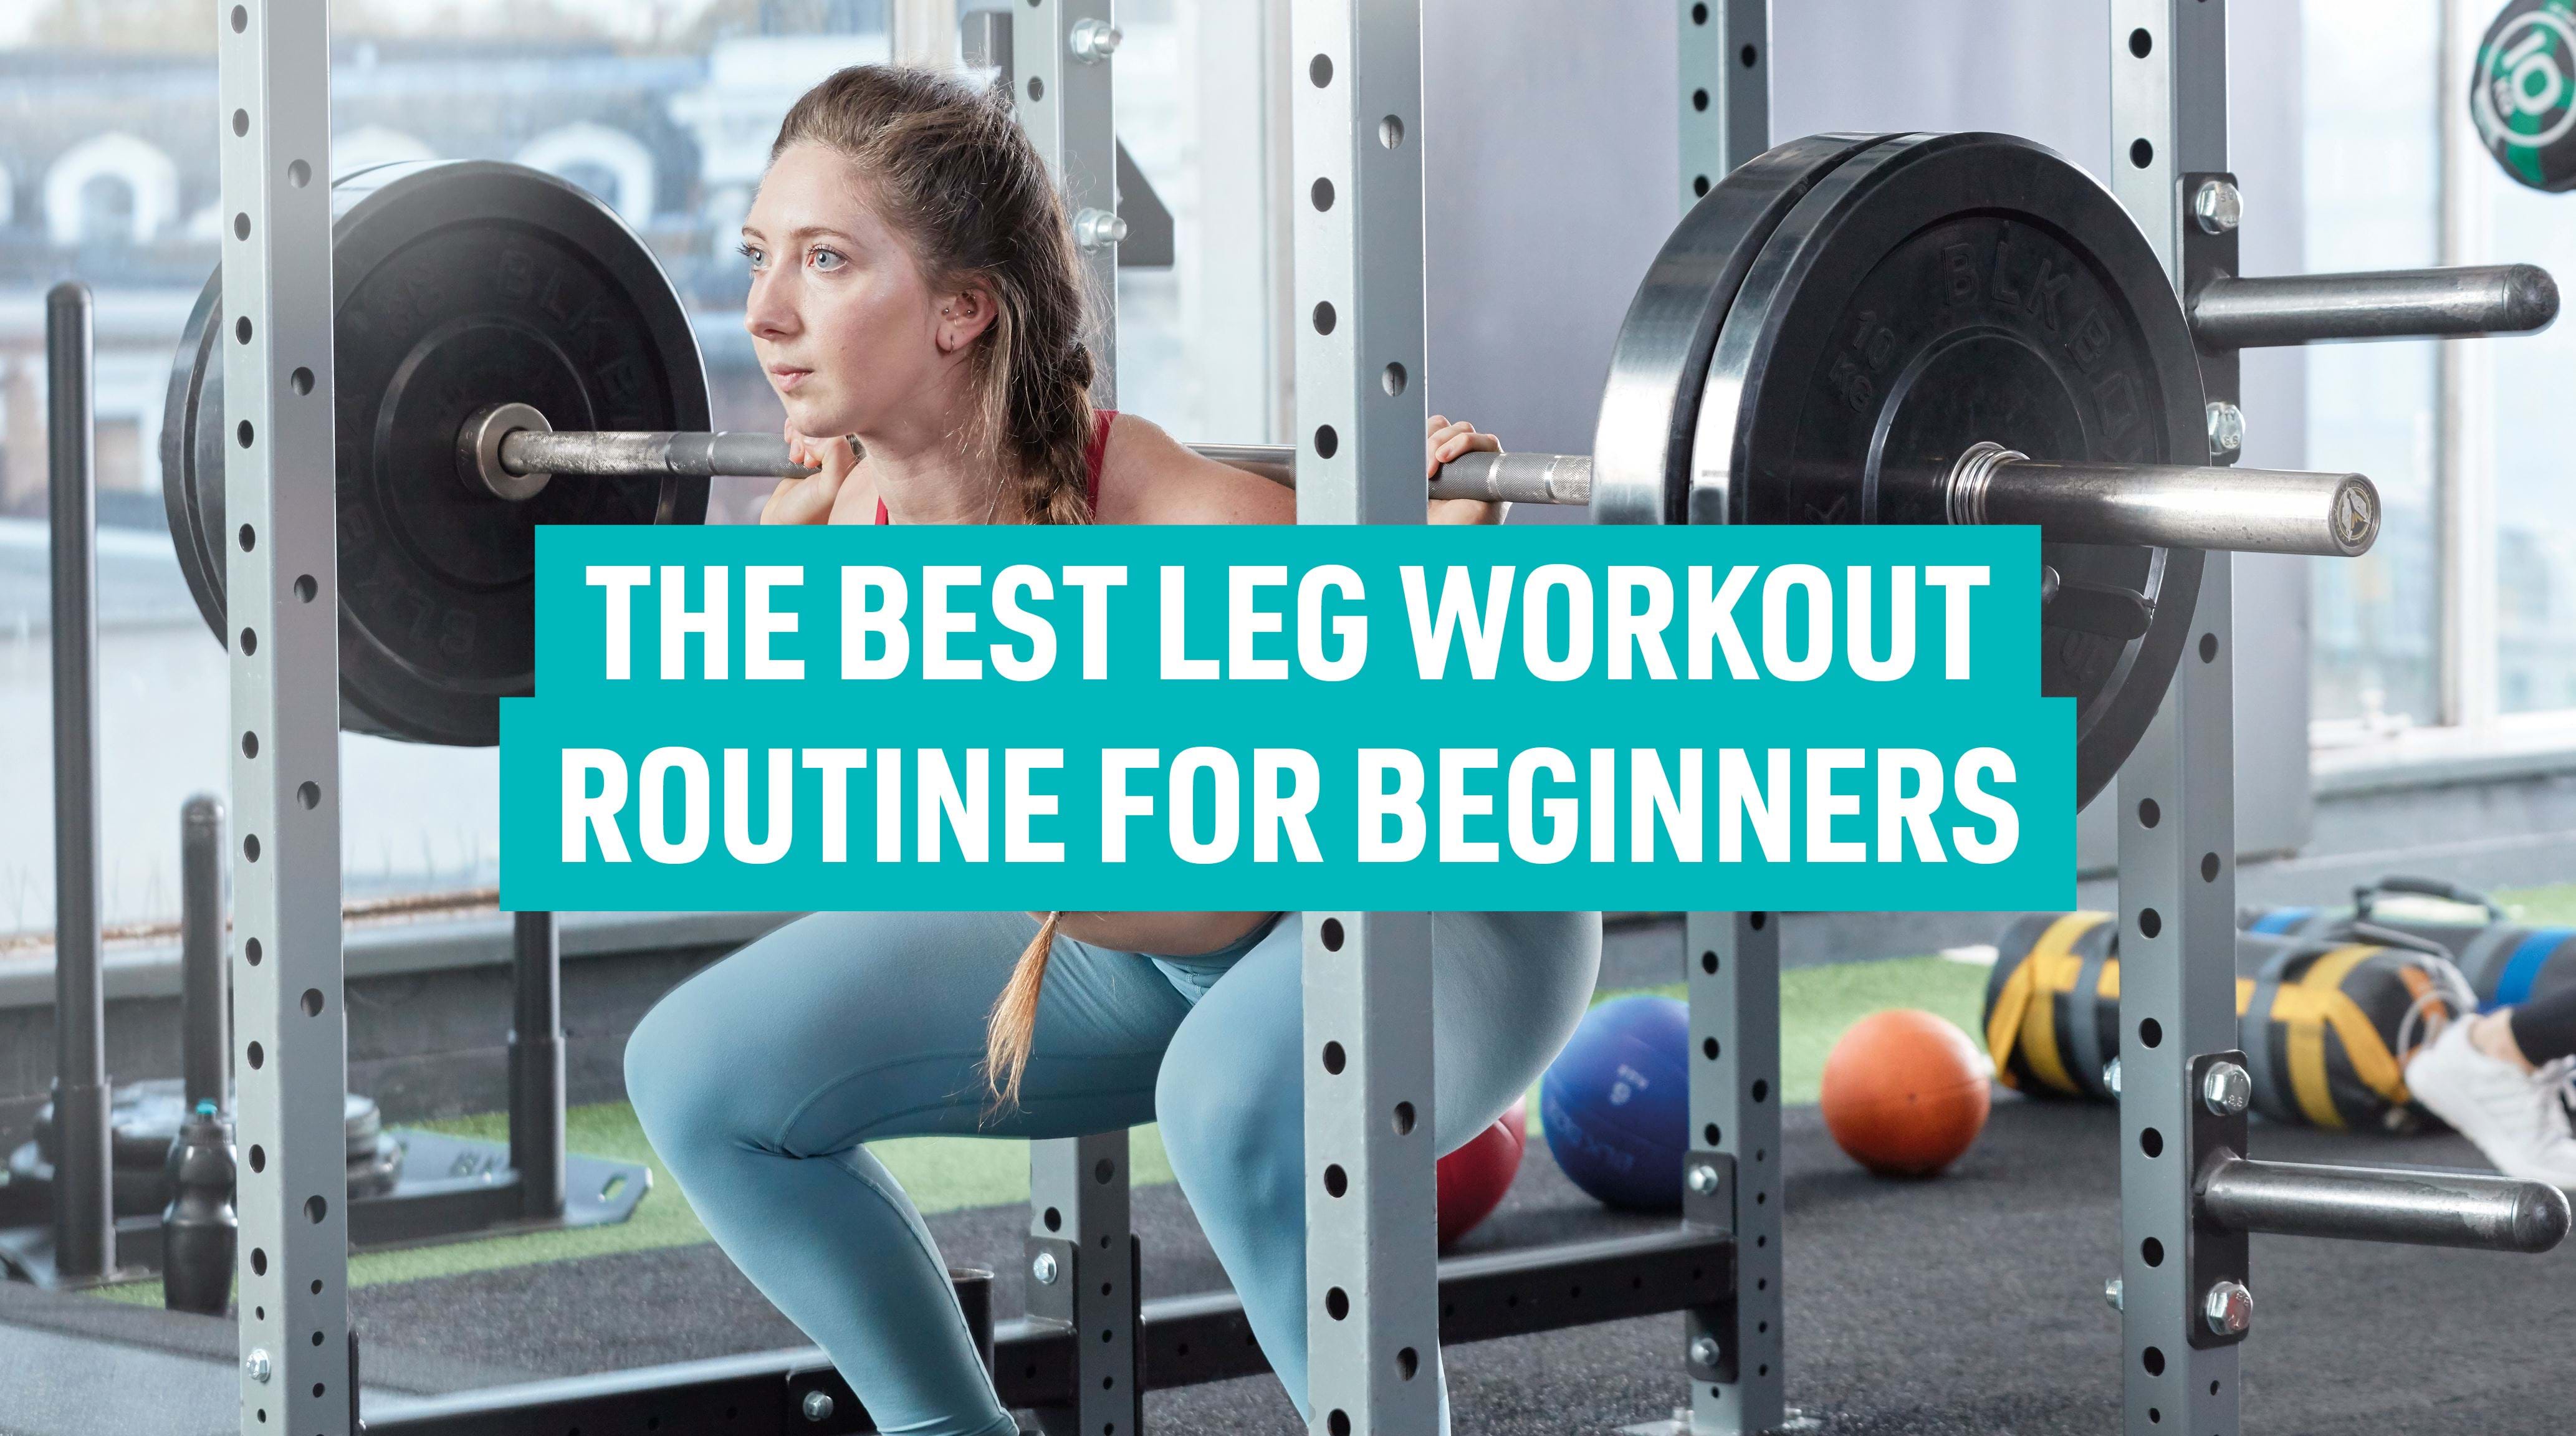 hæk Mediate Alperne The Best Leg Workout Routine For Beginners | PureGym